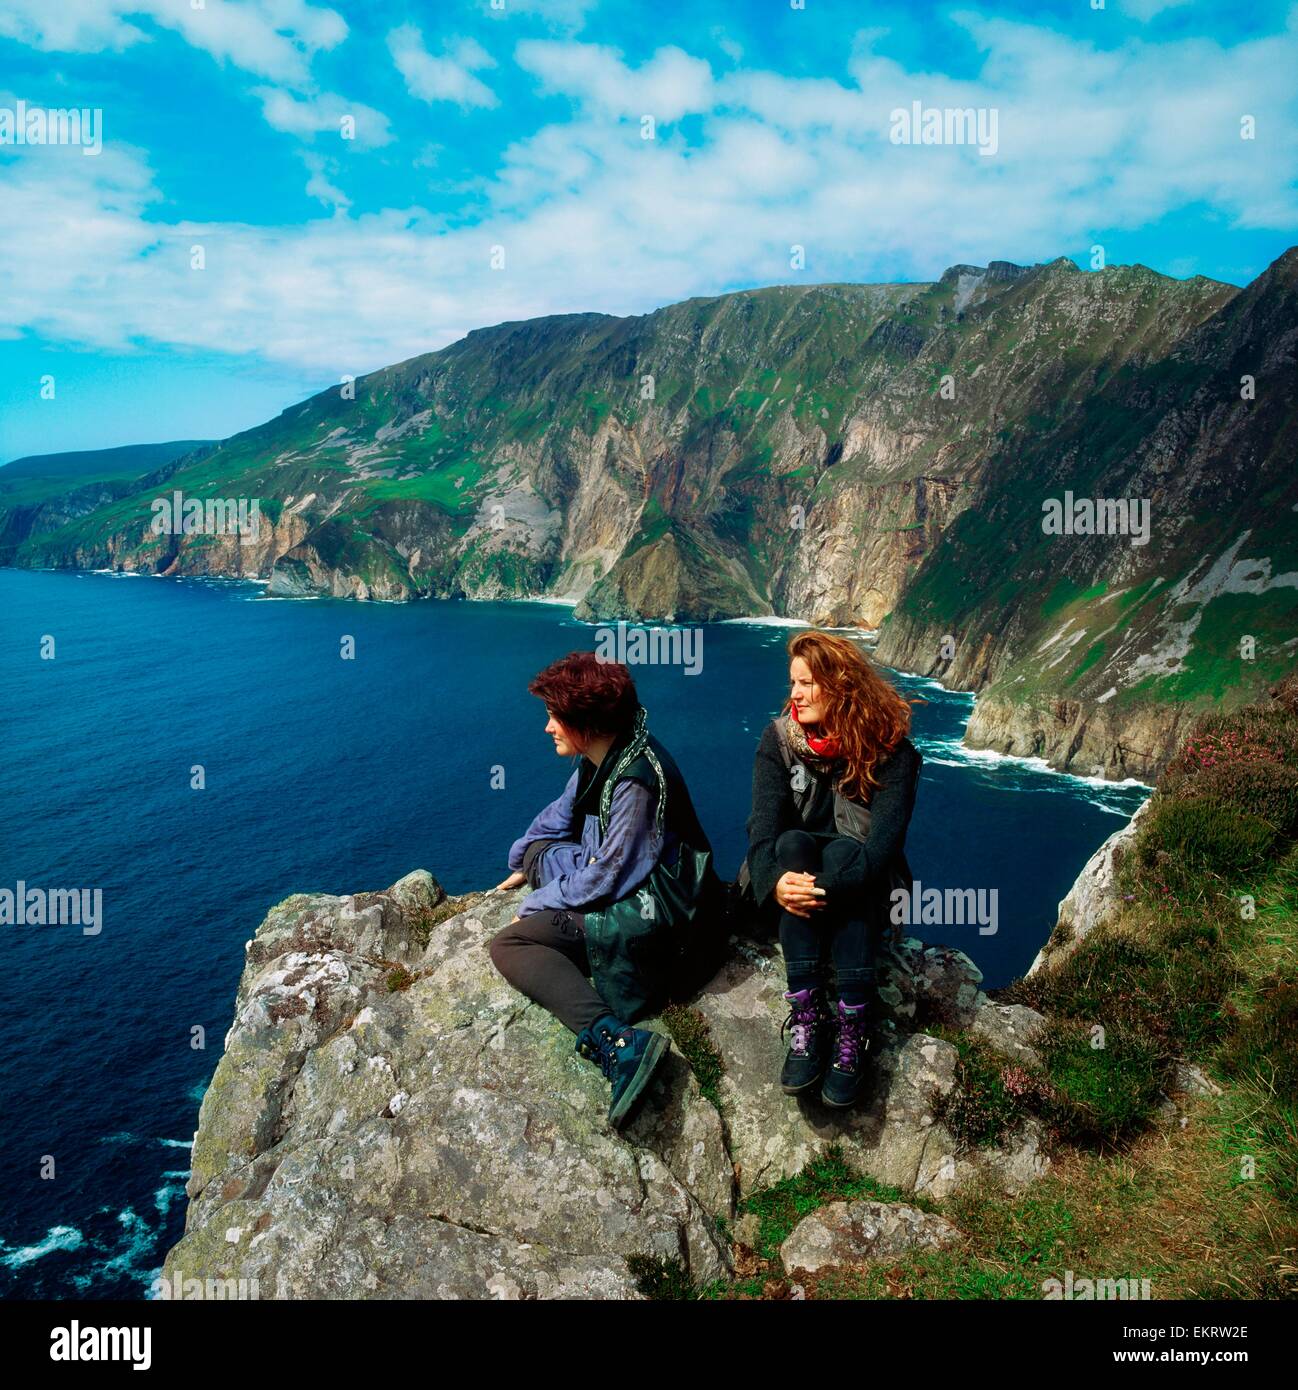 Slieve League, Co Donegal, Ireland Stock Photo